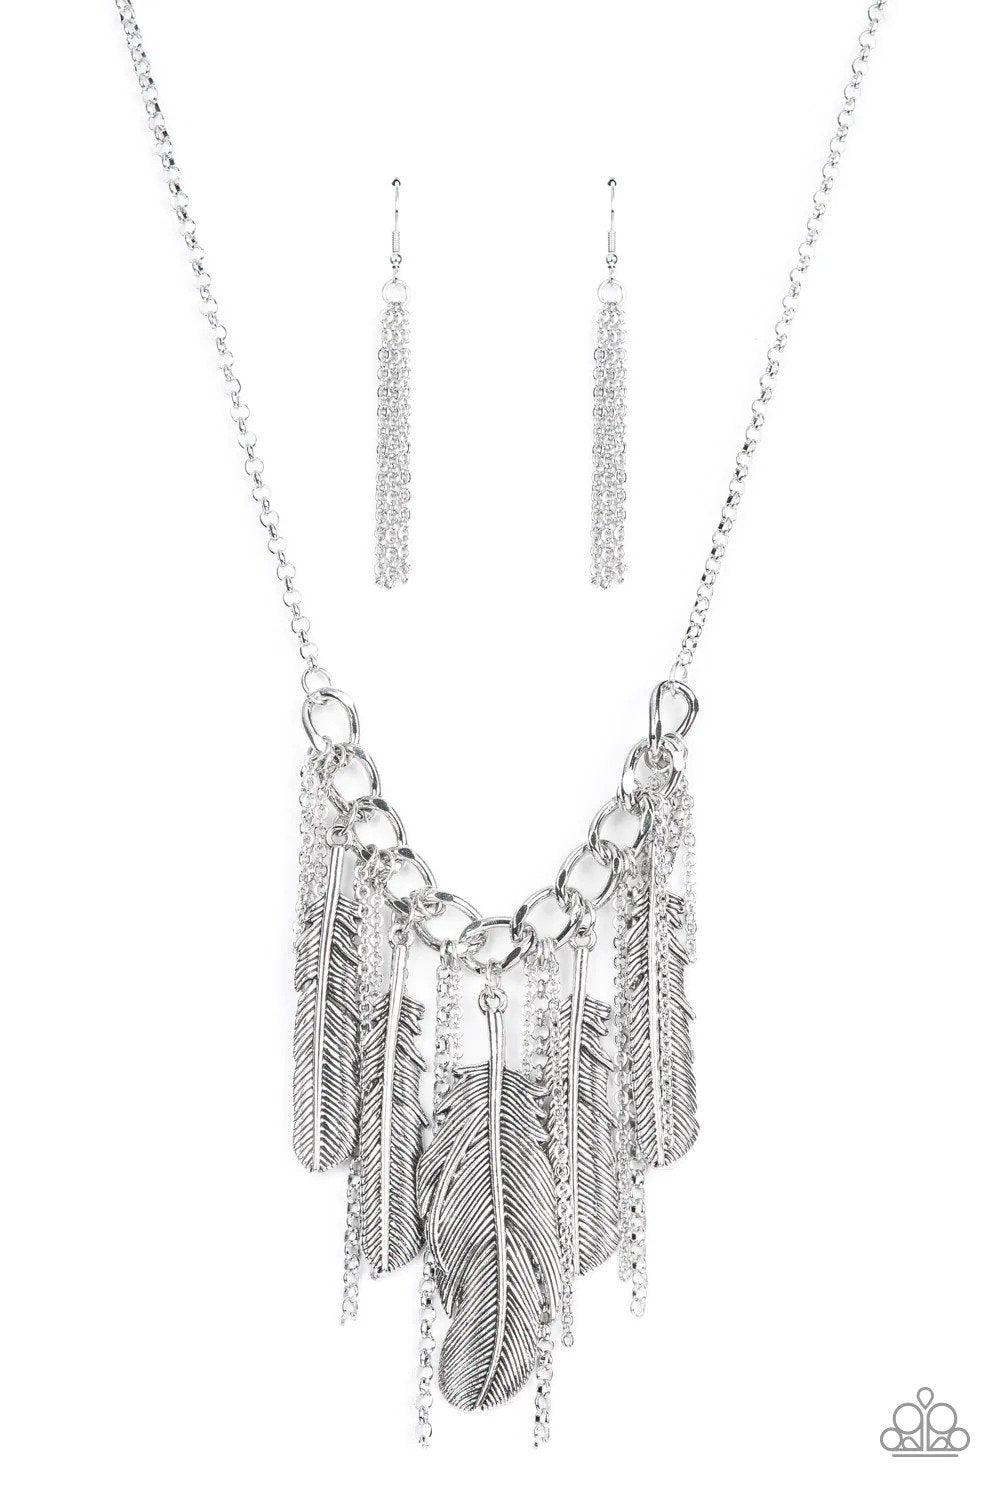 NEST Friends Forever Silver Feather Necklace - Paparazzi Accessories- lightbox - CarasShop.com - $5 Jewelry by Cara Jewels